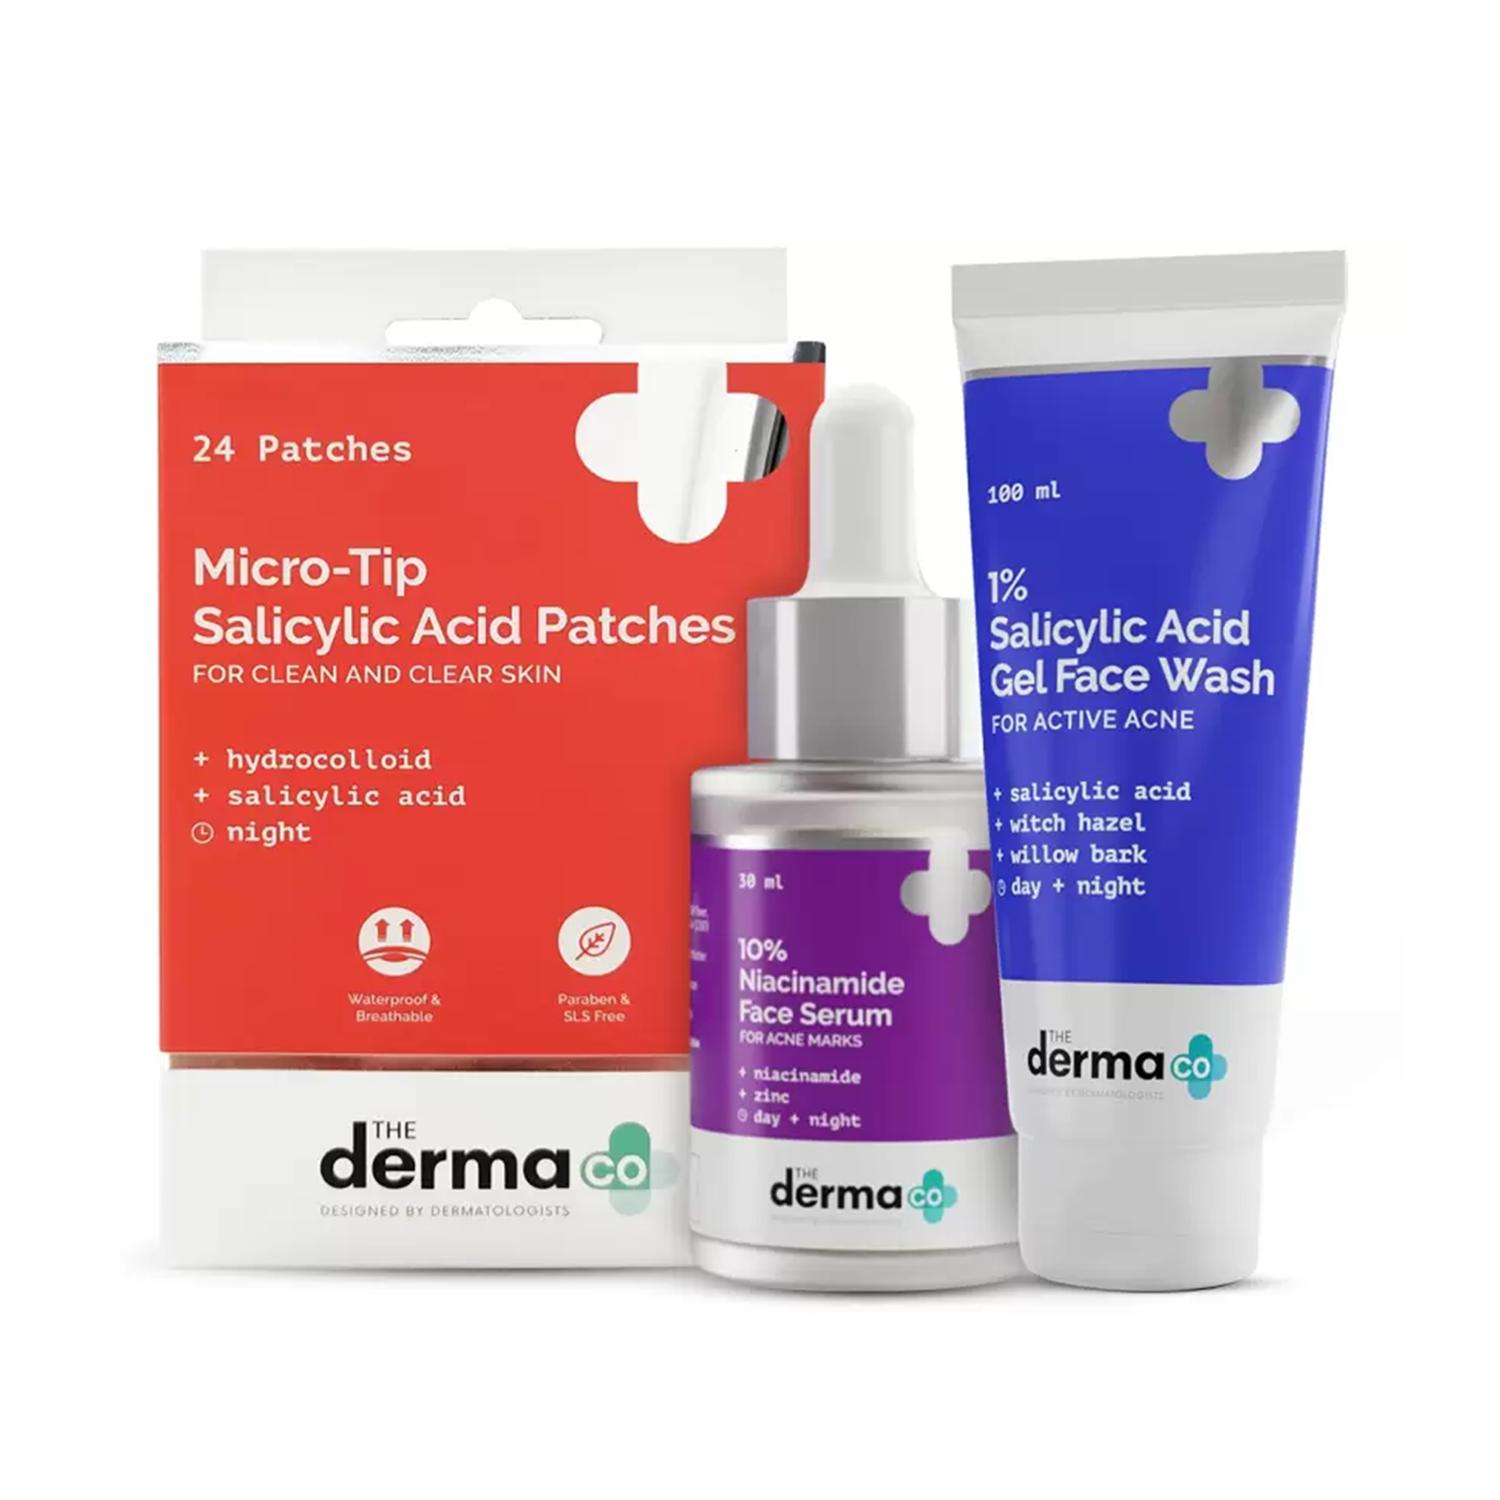 The Derma Co | The Derma Co Fight Acne & Acne Marks Kit - Serum + Face Wash + Micro-Tip Salicylic Acid Acne Patches